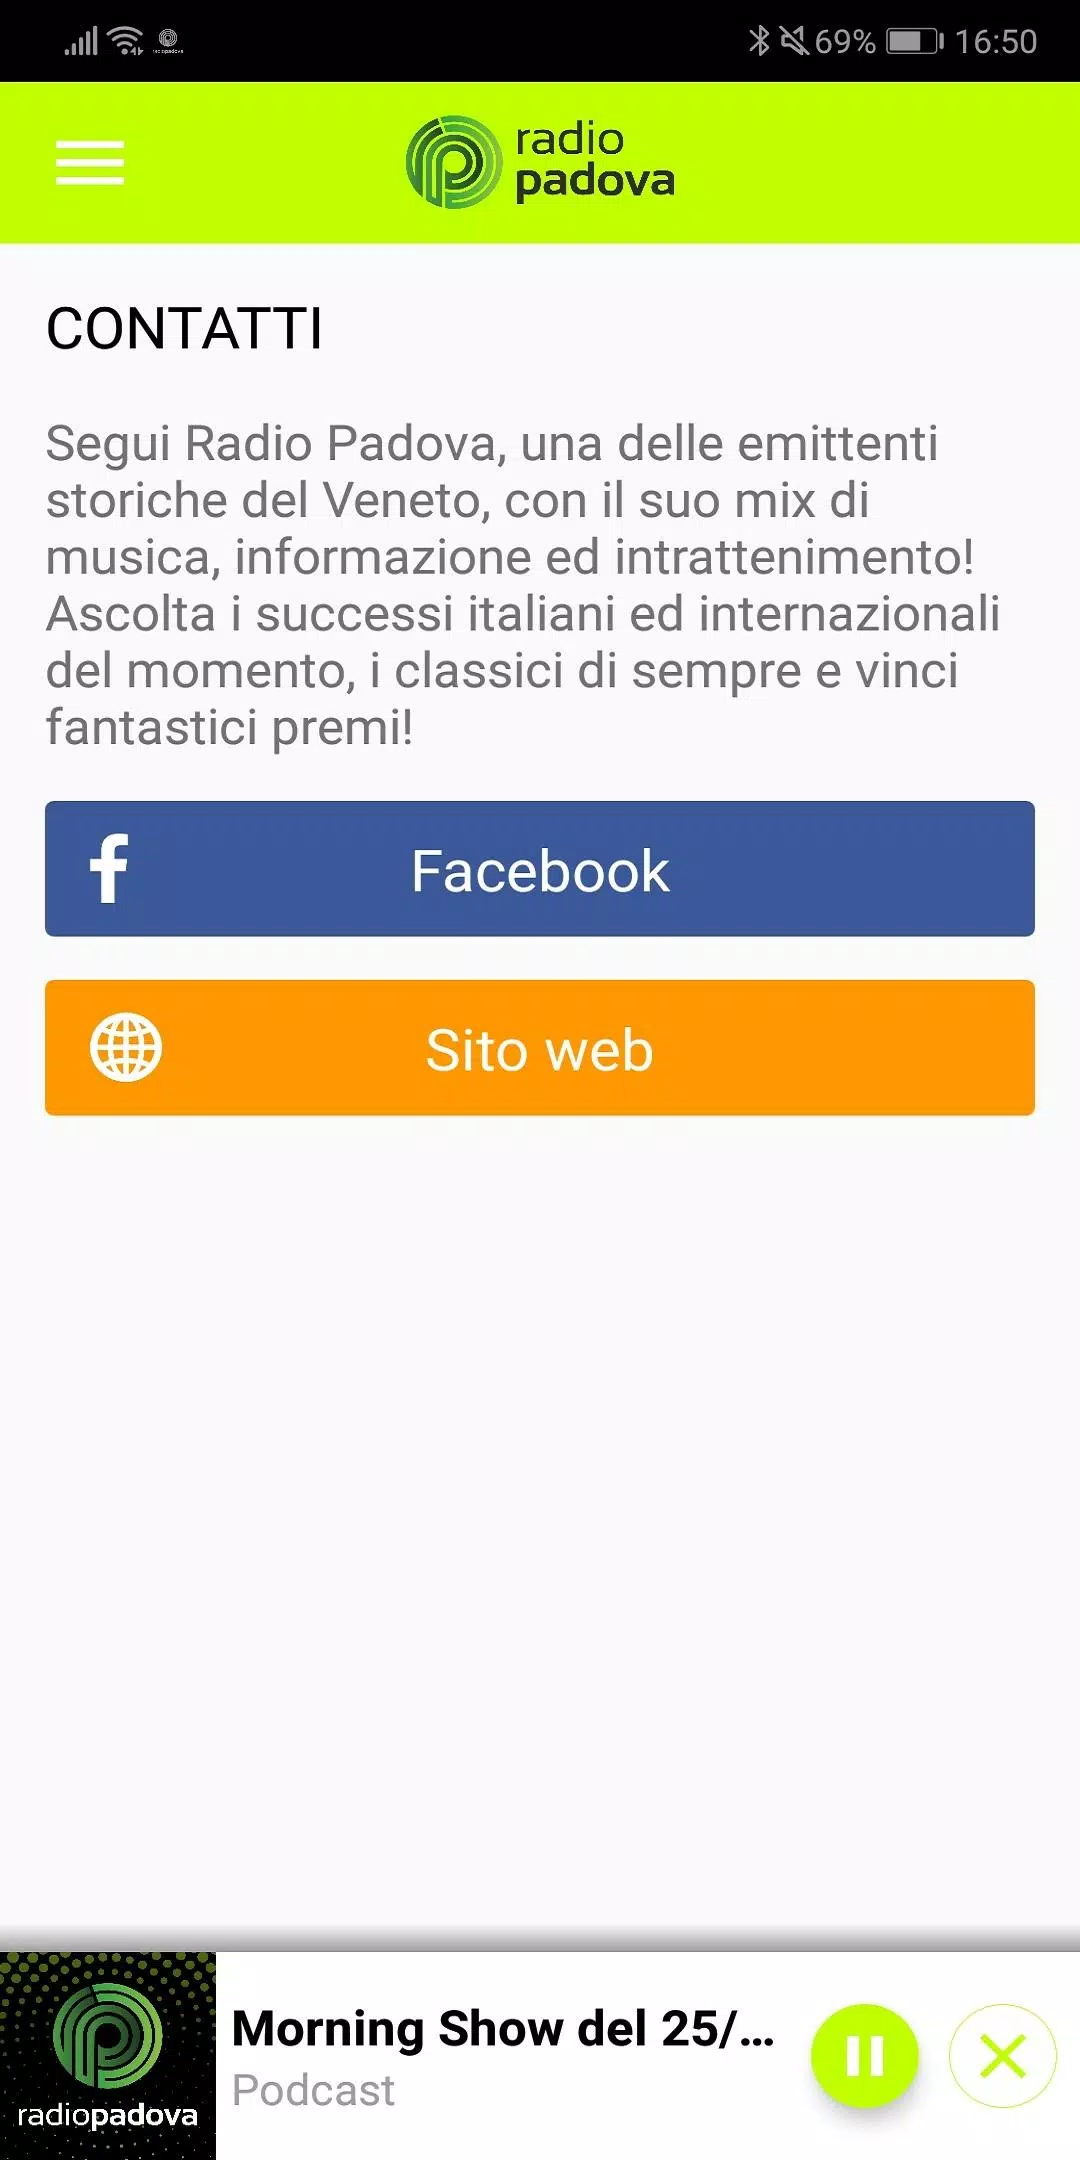 Radio Padova for Android - APK Download